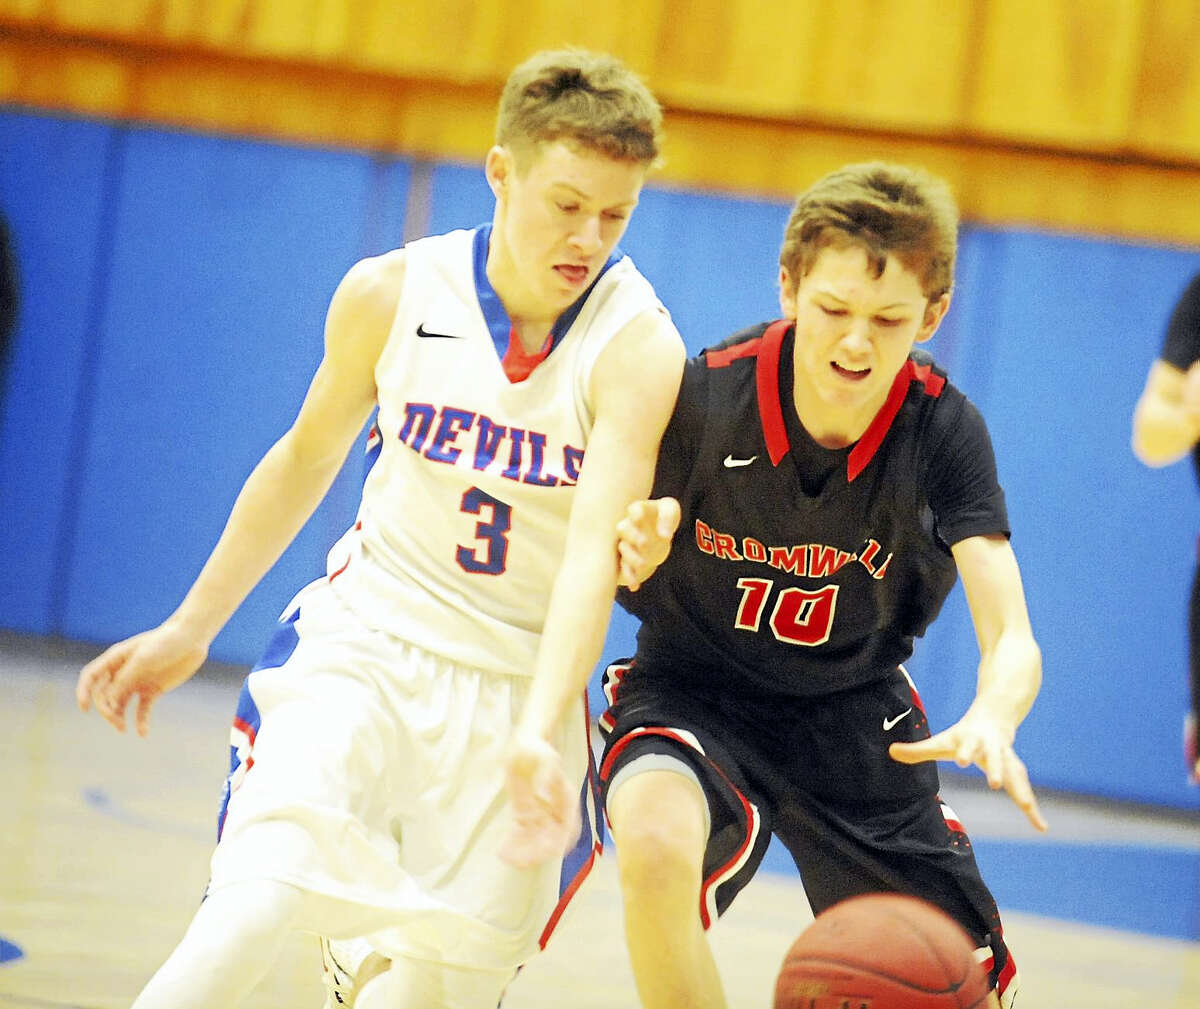 Coginchaug’s Ryan Cross, left, and Cromwell’s Noah Budzik fight for a loose ball in the Blue Devils’ 58-45 win Friday.